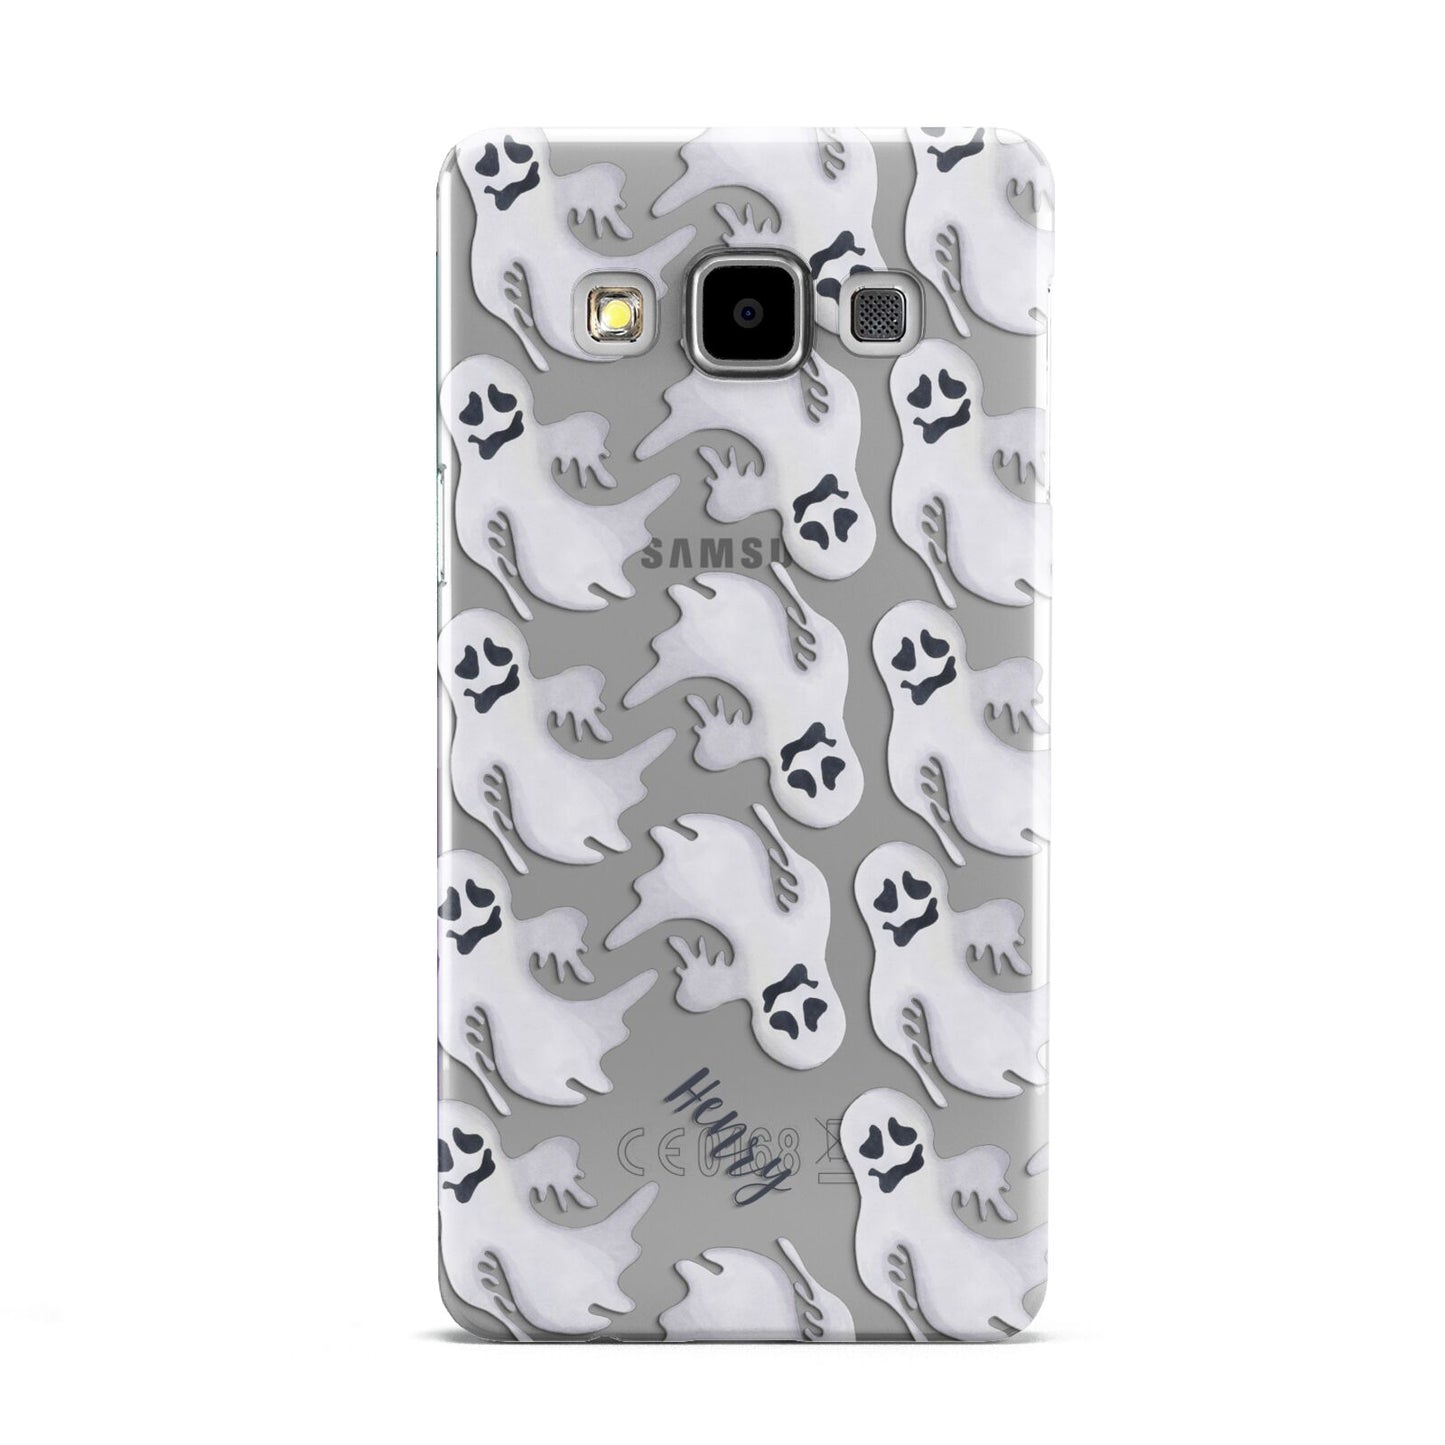 Floaty Ghosts Personalised Samsung Galaxy A5 Case